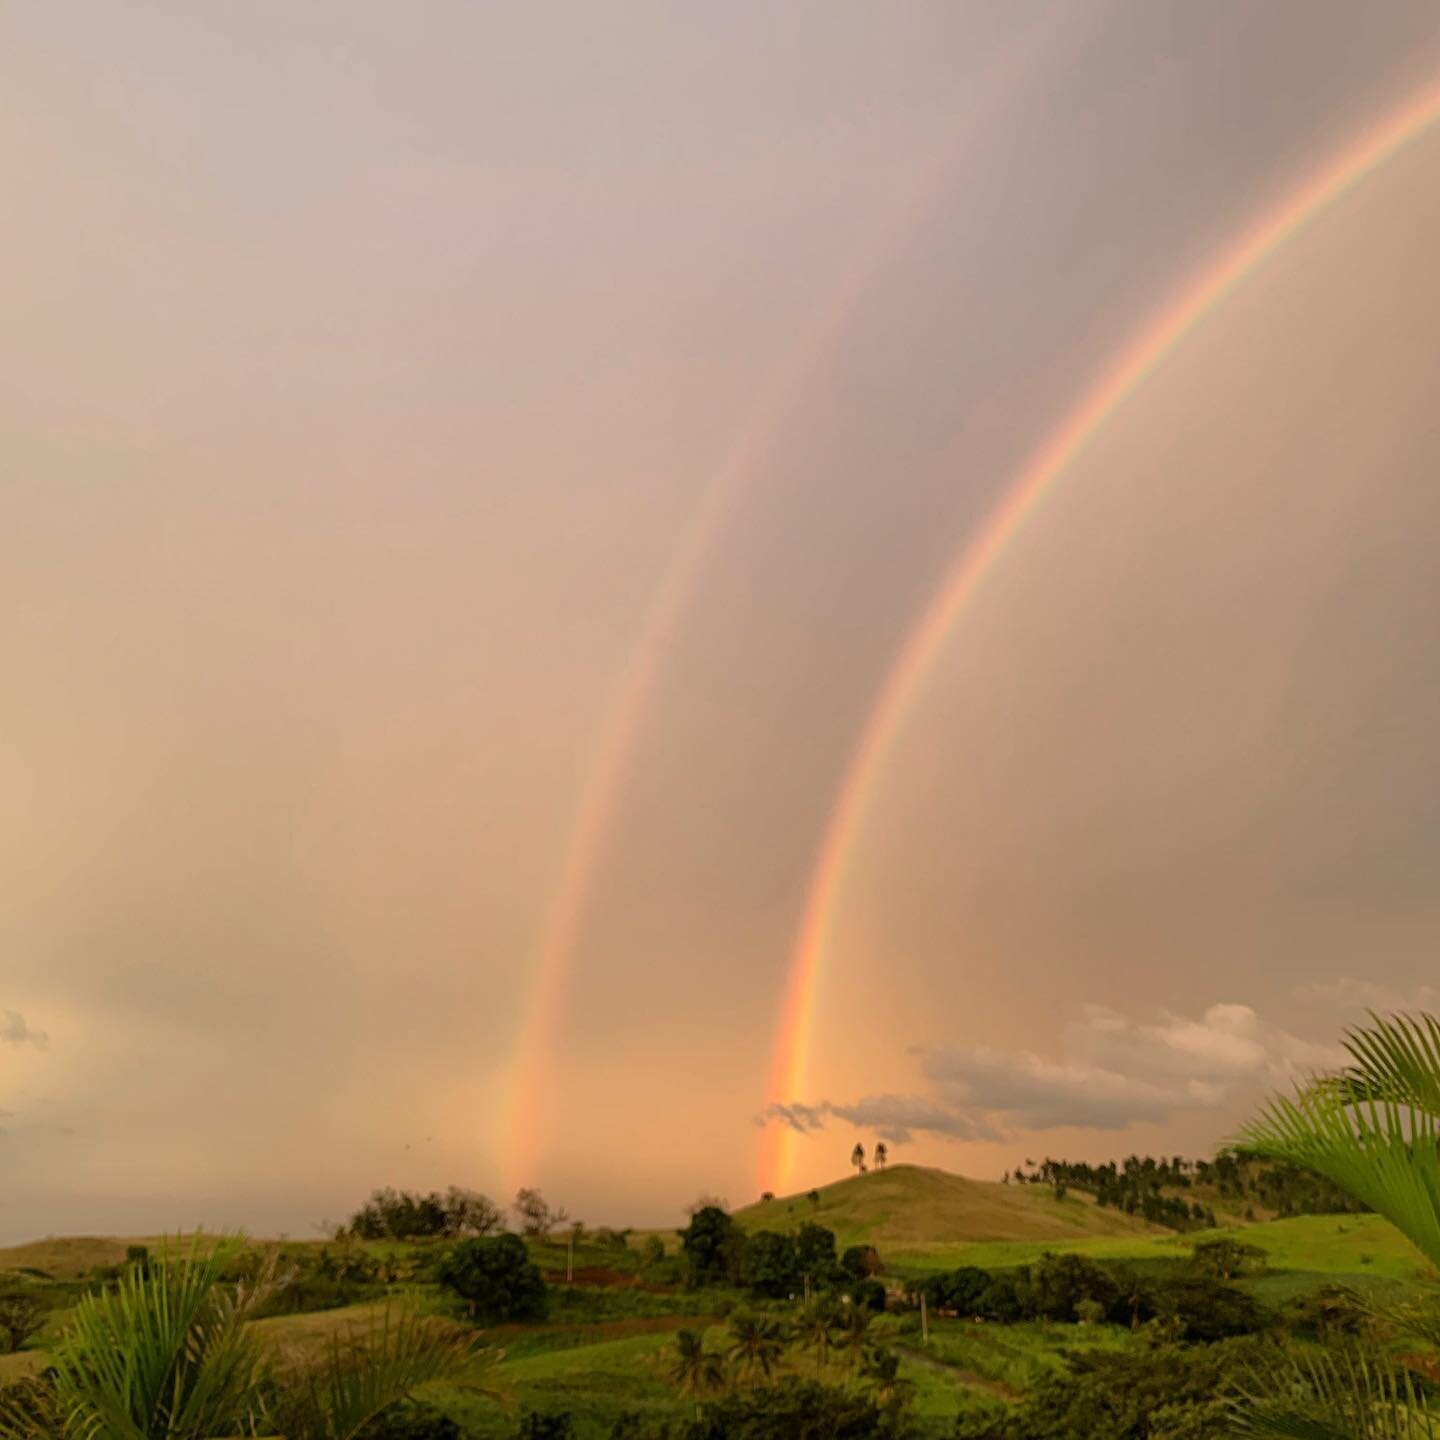 Our hearts go out to all of those affected in the northern and eastern areas of Fiji who were under the path of category 5 Tropical cyclone Yasa. ❤️

Will took this photo from our farm in Momi, looking north east of a double rainbow 🌈 It arced all t